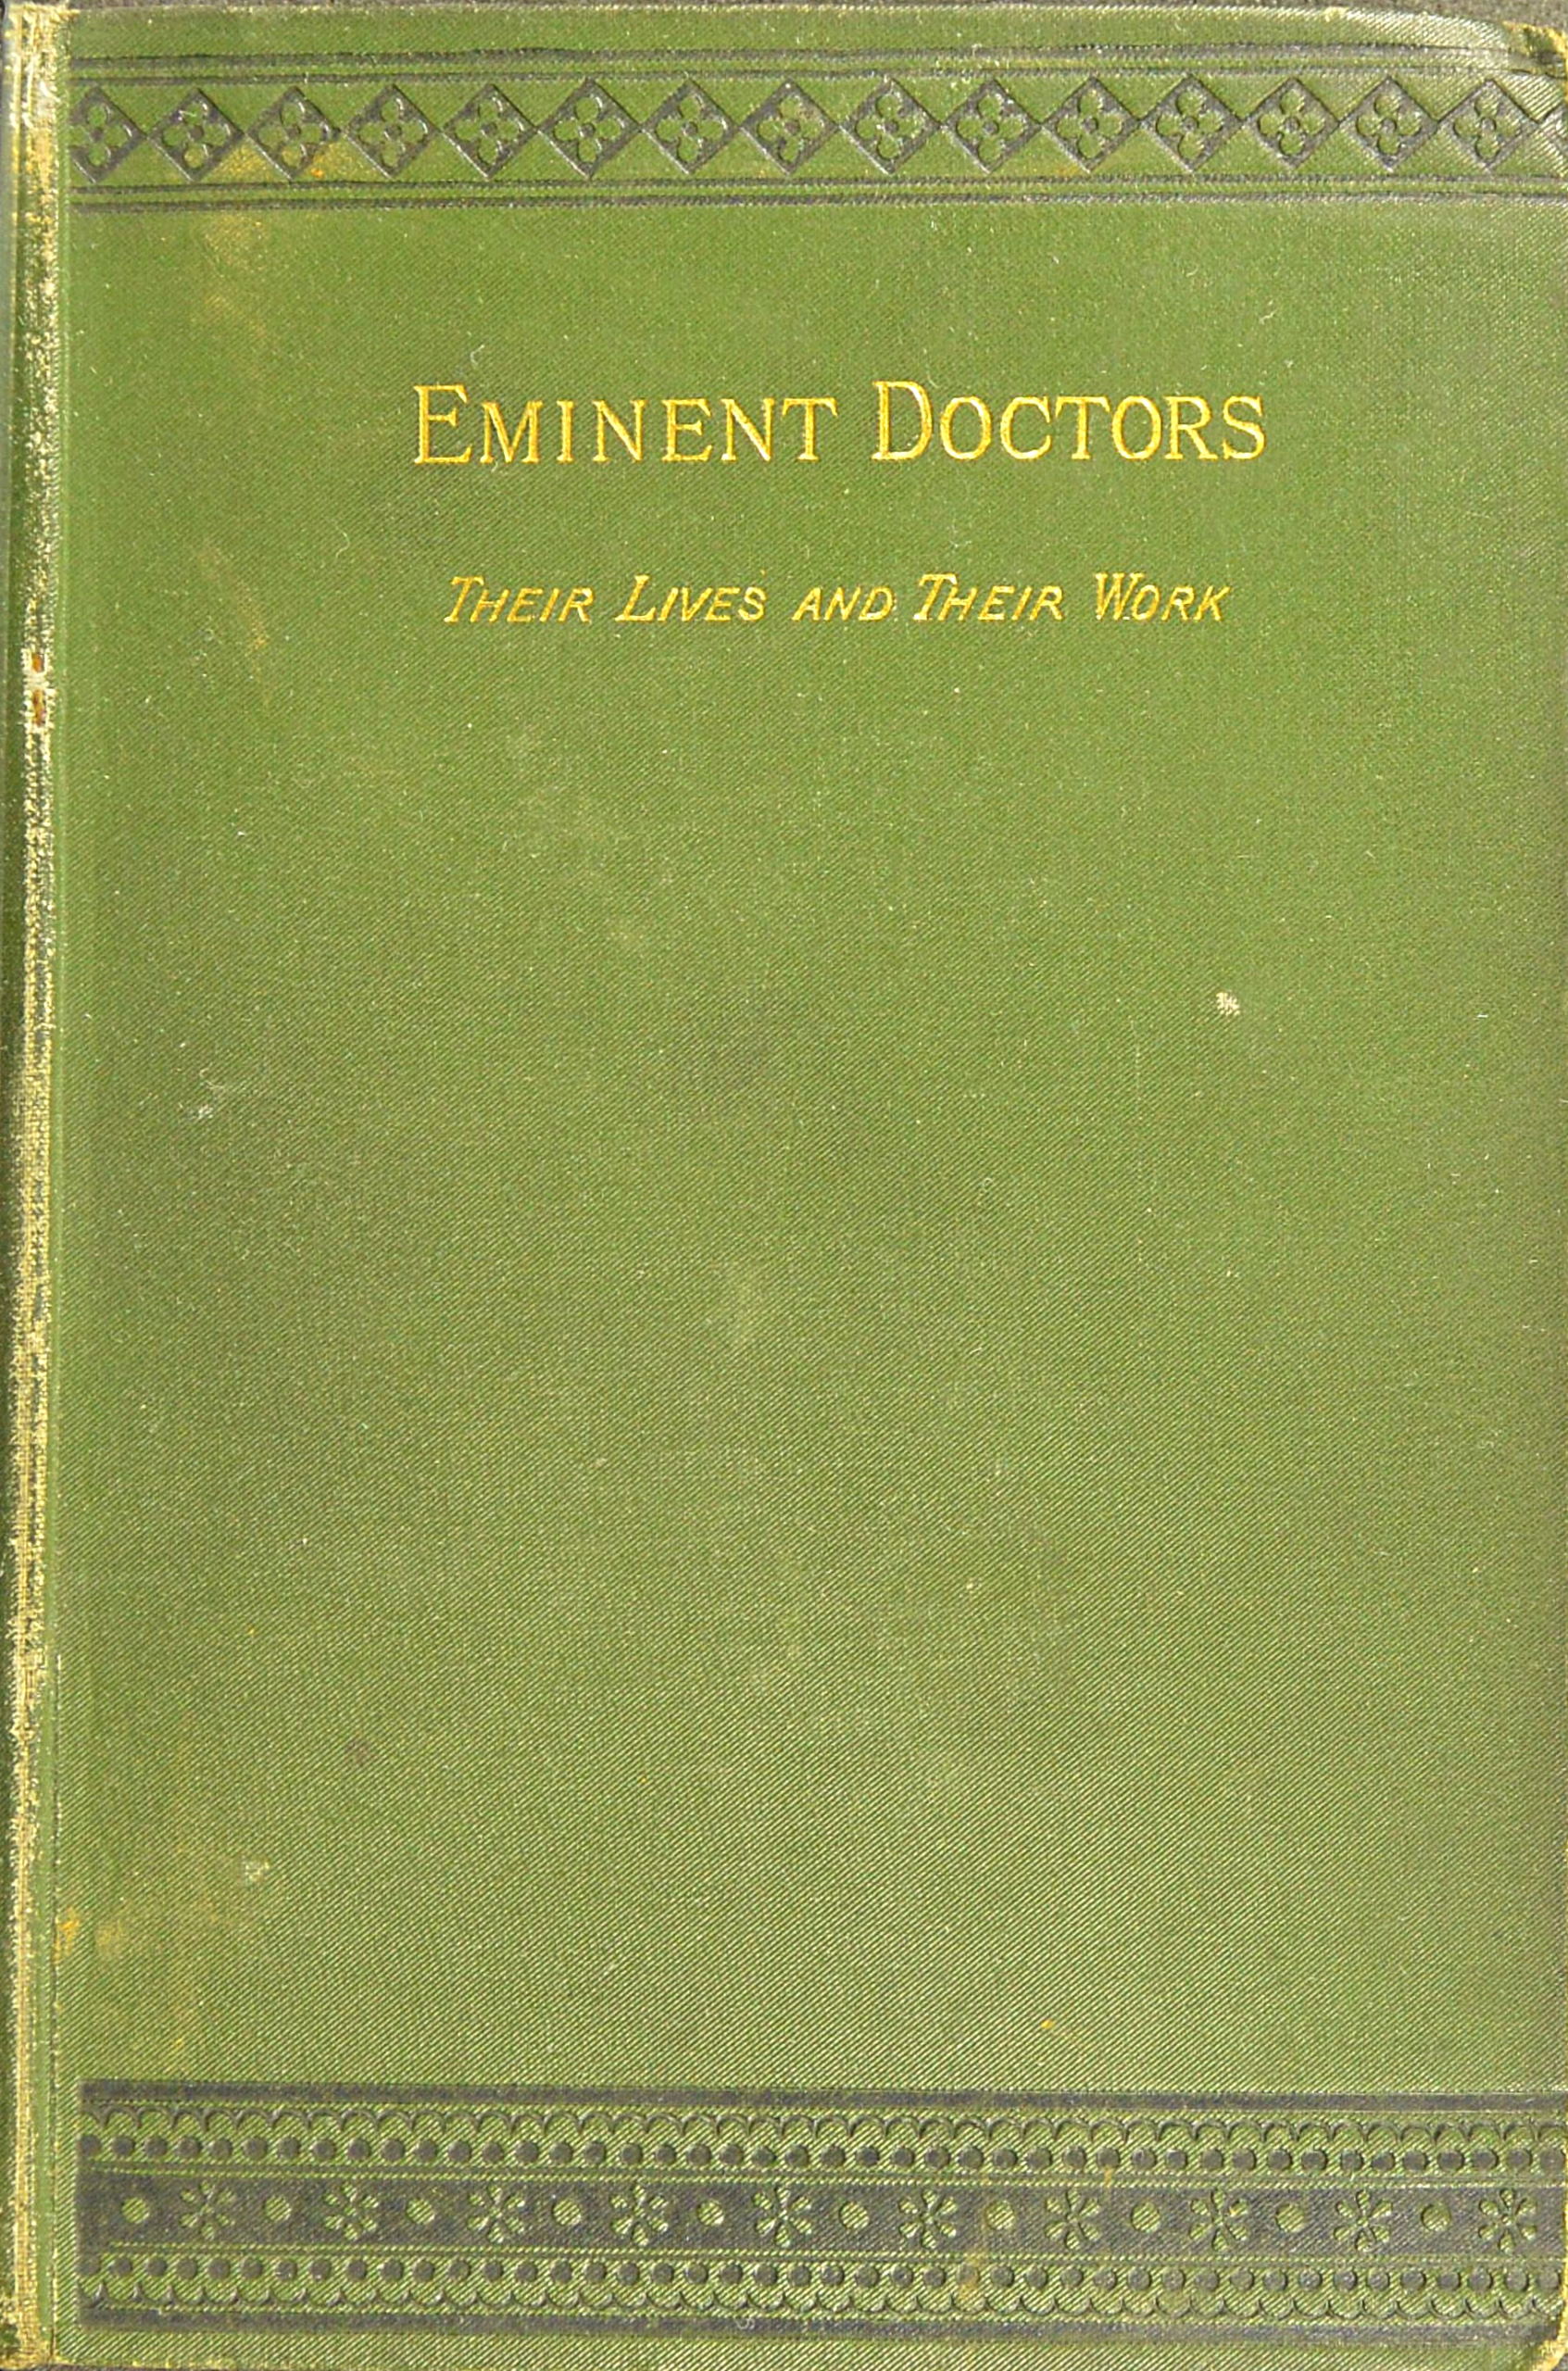 Eminent Doctors Their Lives and their Work; Vol. 2 of 2, by G